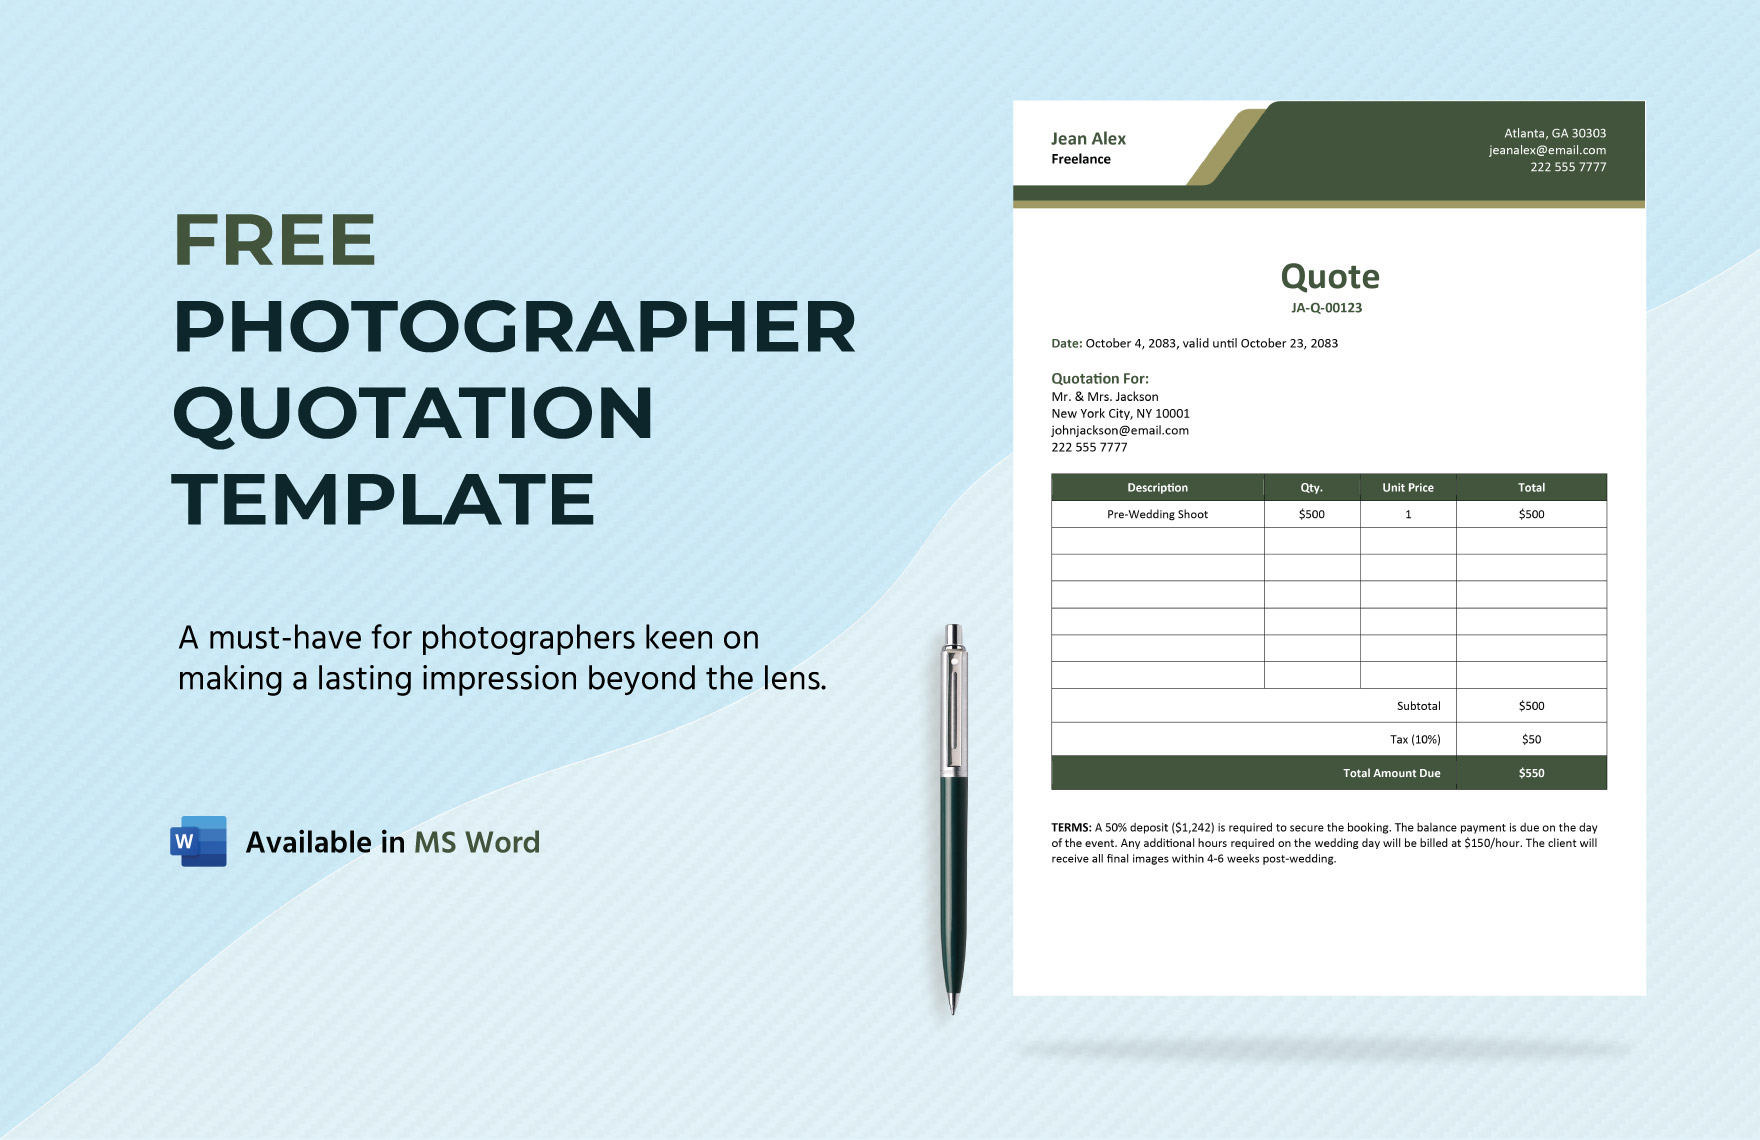 Free Photographer Quotation Template